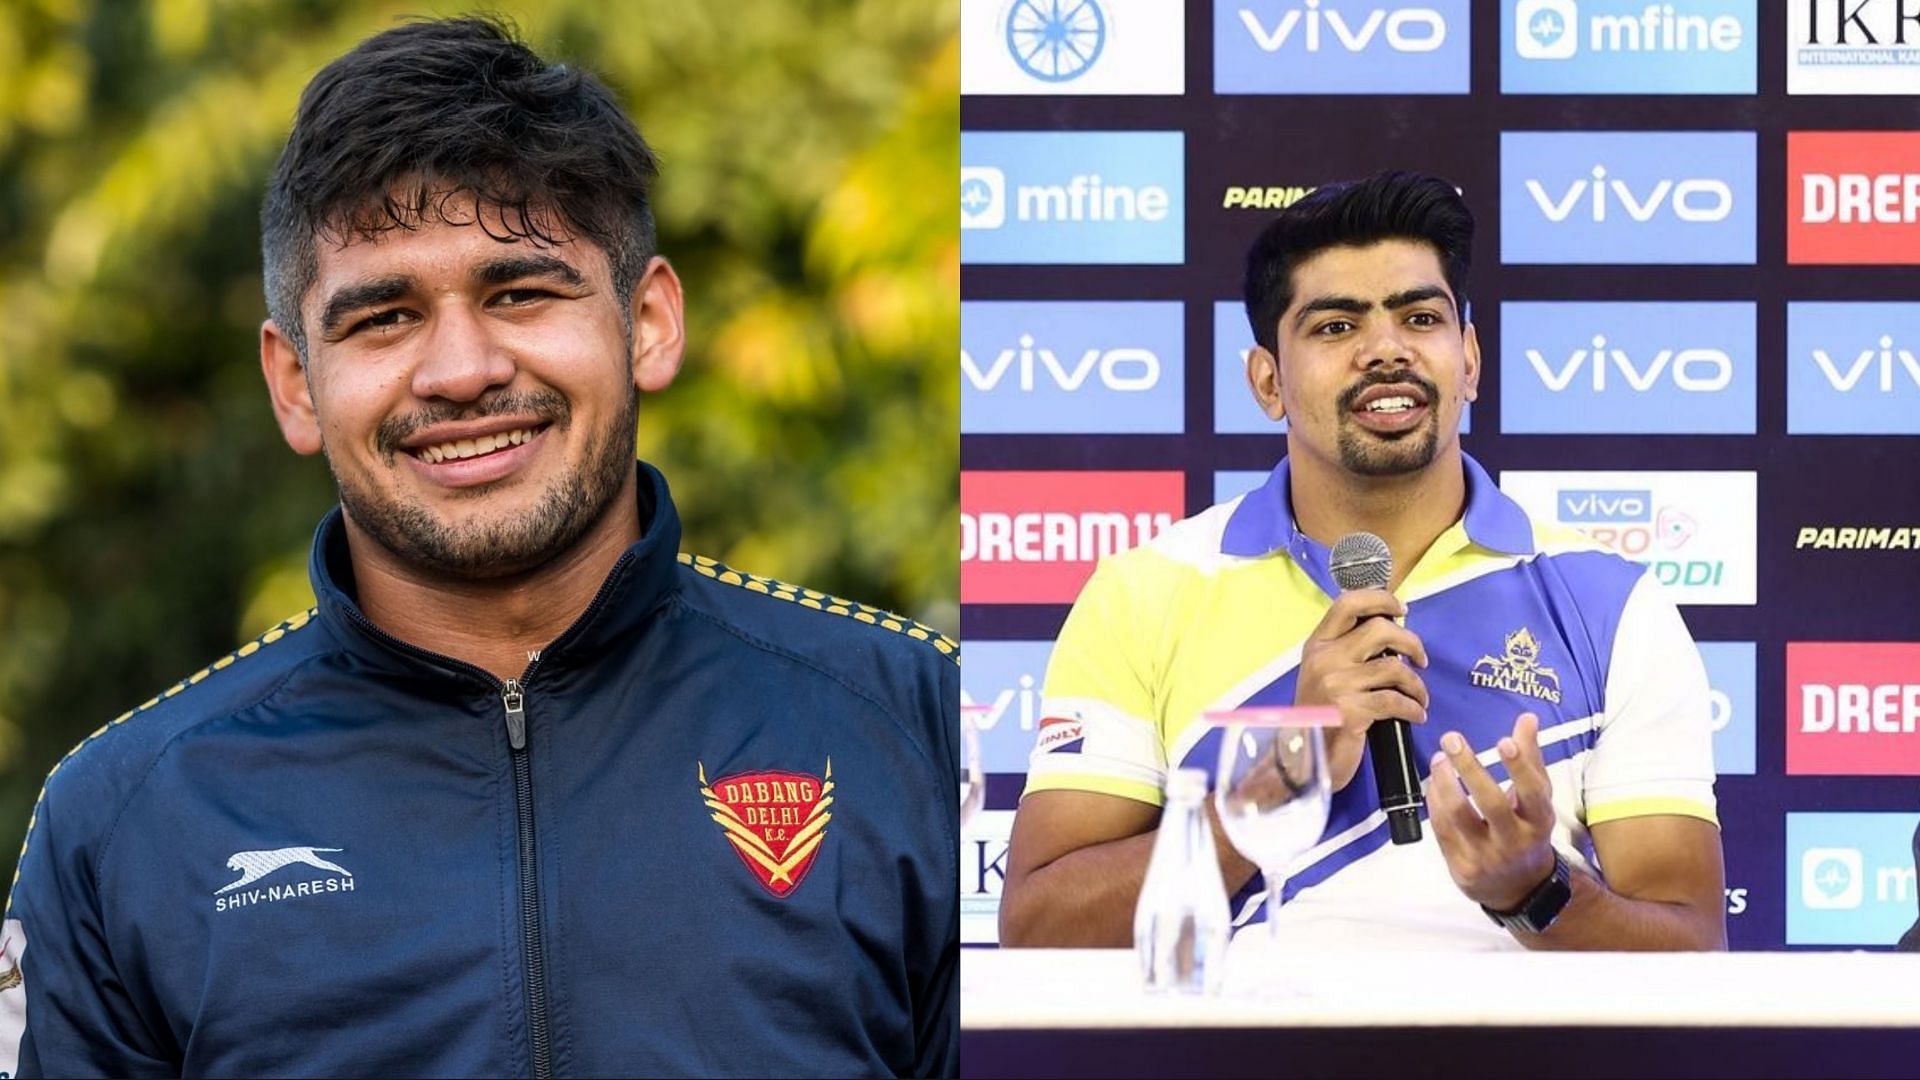 Pawan Sehrawat and Naveen Kumar are two of the top raiders in Pro Kabaddi (Image: Instagram)